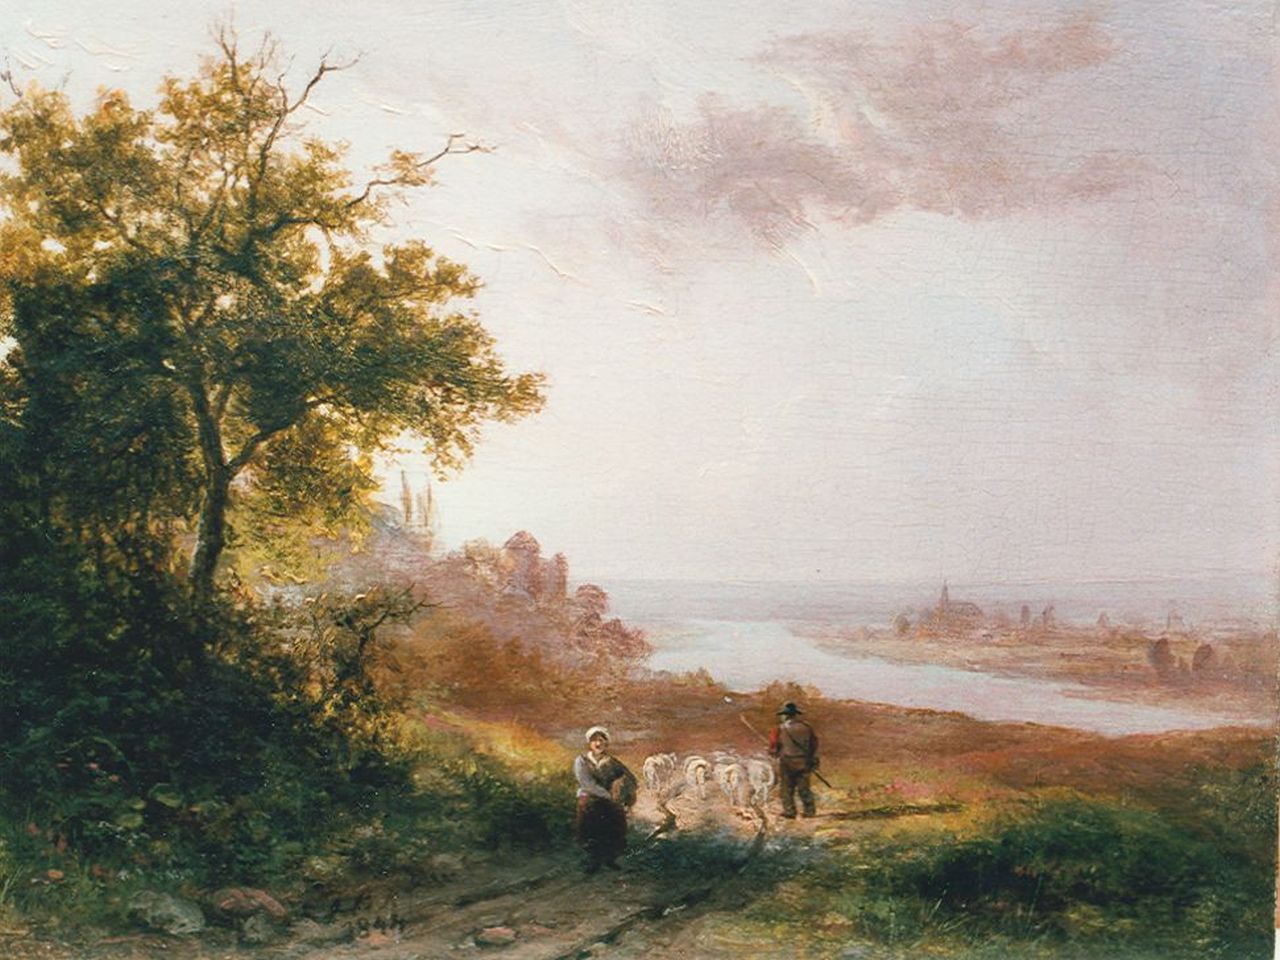 Klombeck J.B.  | Johann Bernard Klombeck, A river landscape, oil on panel 12.5 x 16.5 cm, signed with the initials J.B.K. and dated 1844